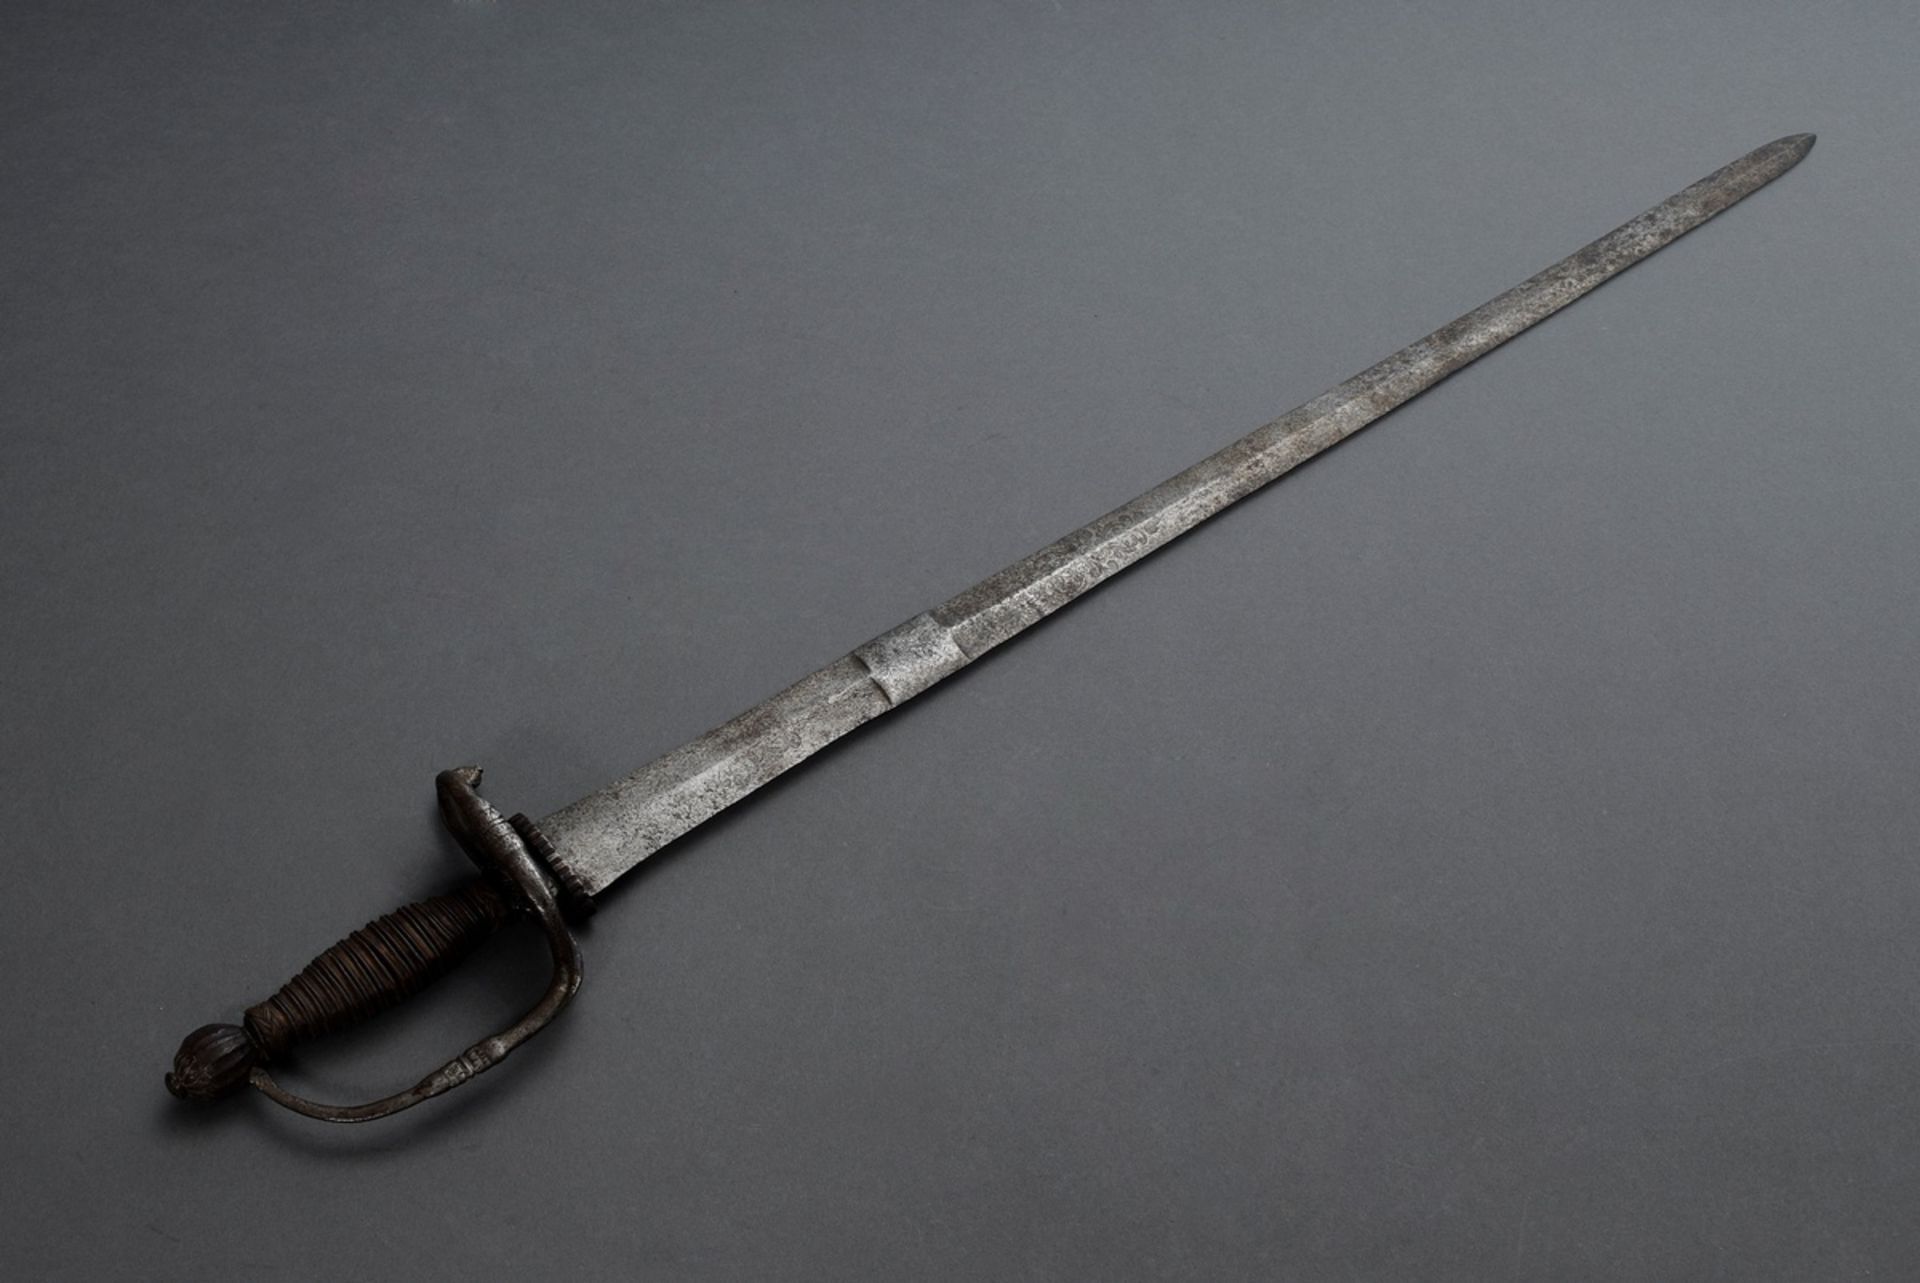 Sword with florally engraved steel blade, signature remains, curved quillons and hand guard as well - Image 5 of 5